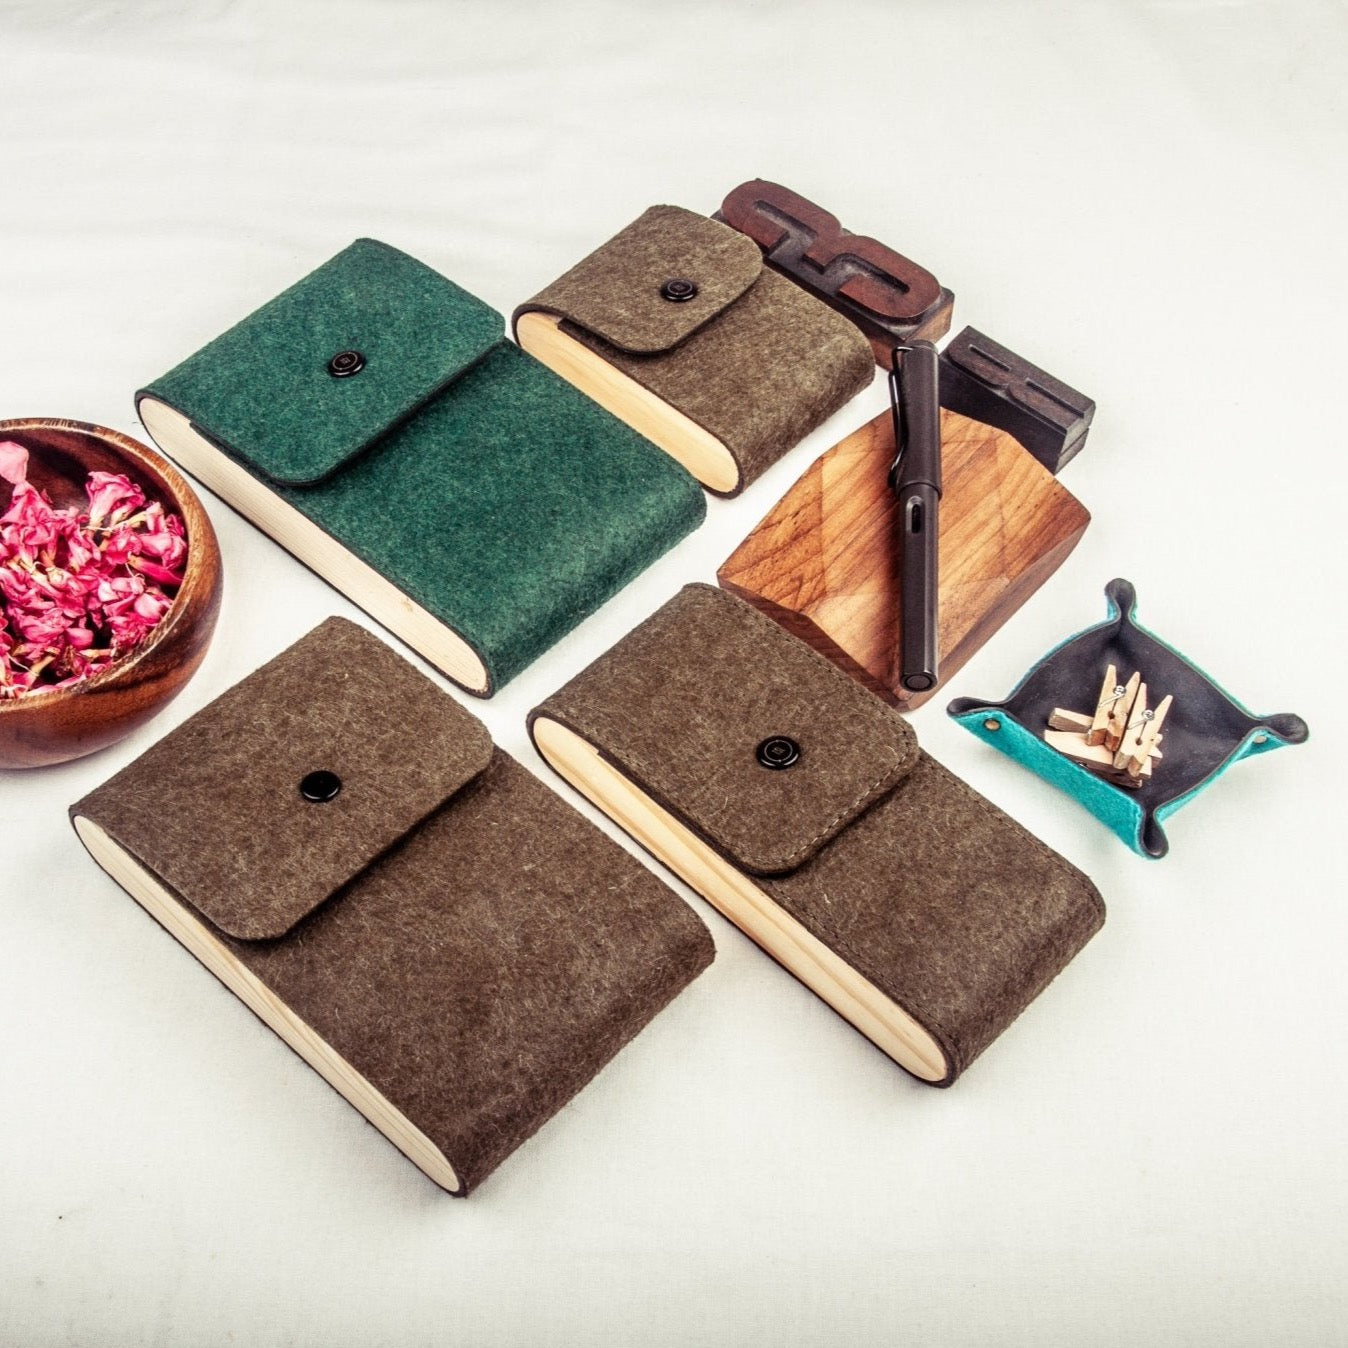 Multipurpose pouches - Upcycled tyre tube, waste wood and recycled felt - The Second Life India